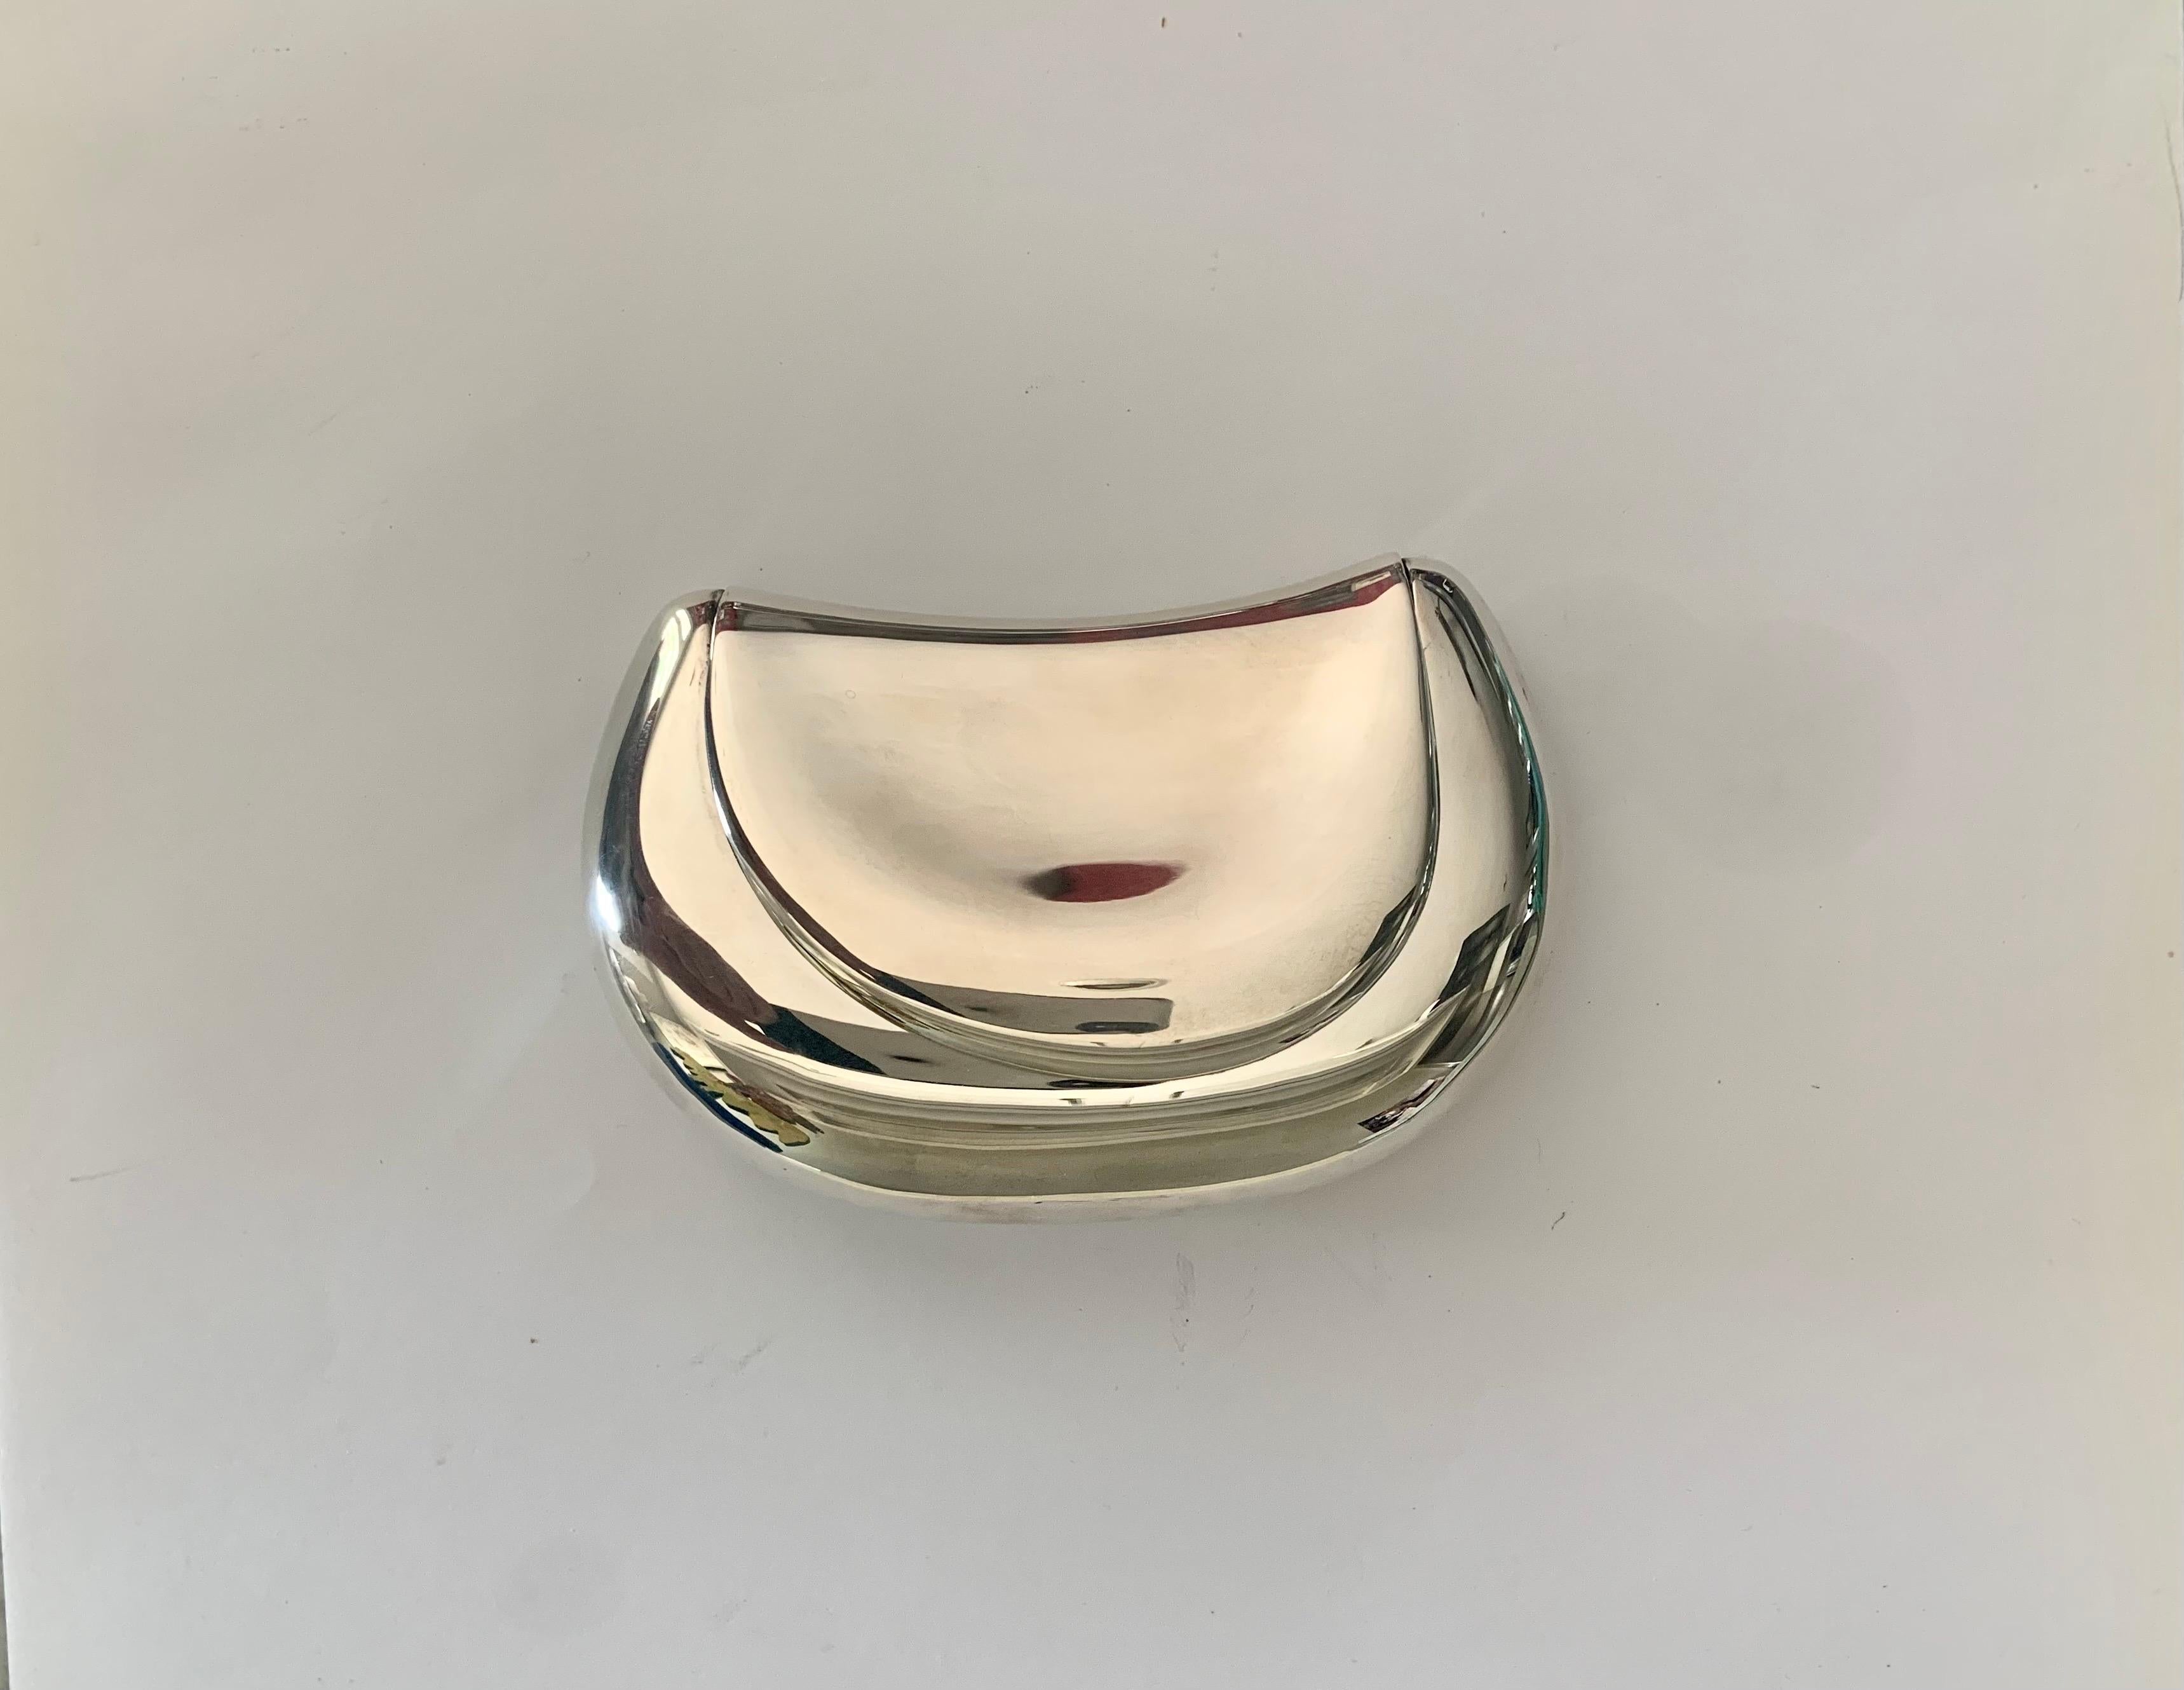 An early design from Elsa Peretti for Tiffany & Co, this stunning and rare sterling silver clutch is so organic, it fits perfectly in the palm of your hand.  The bag is smooth and sleek and just large enough for a lipstick, key and credit card.  It